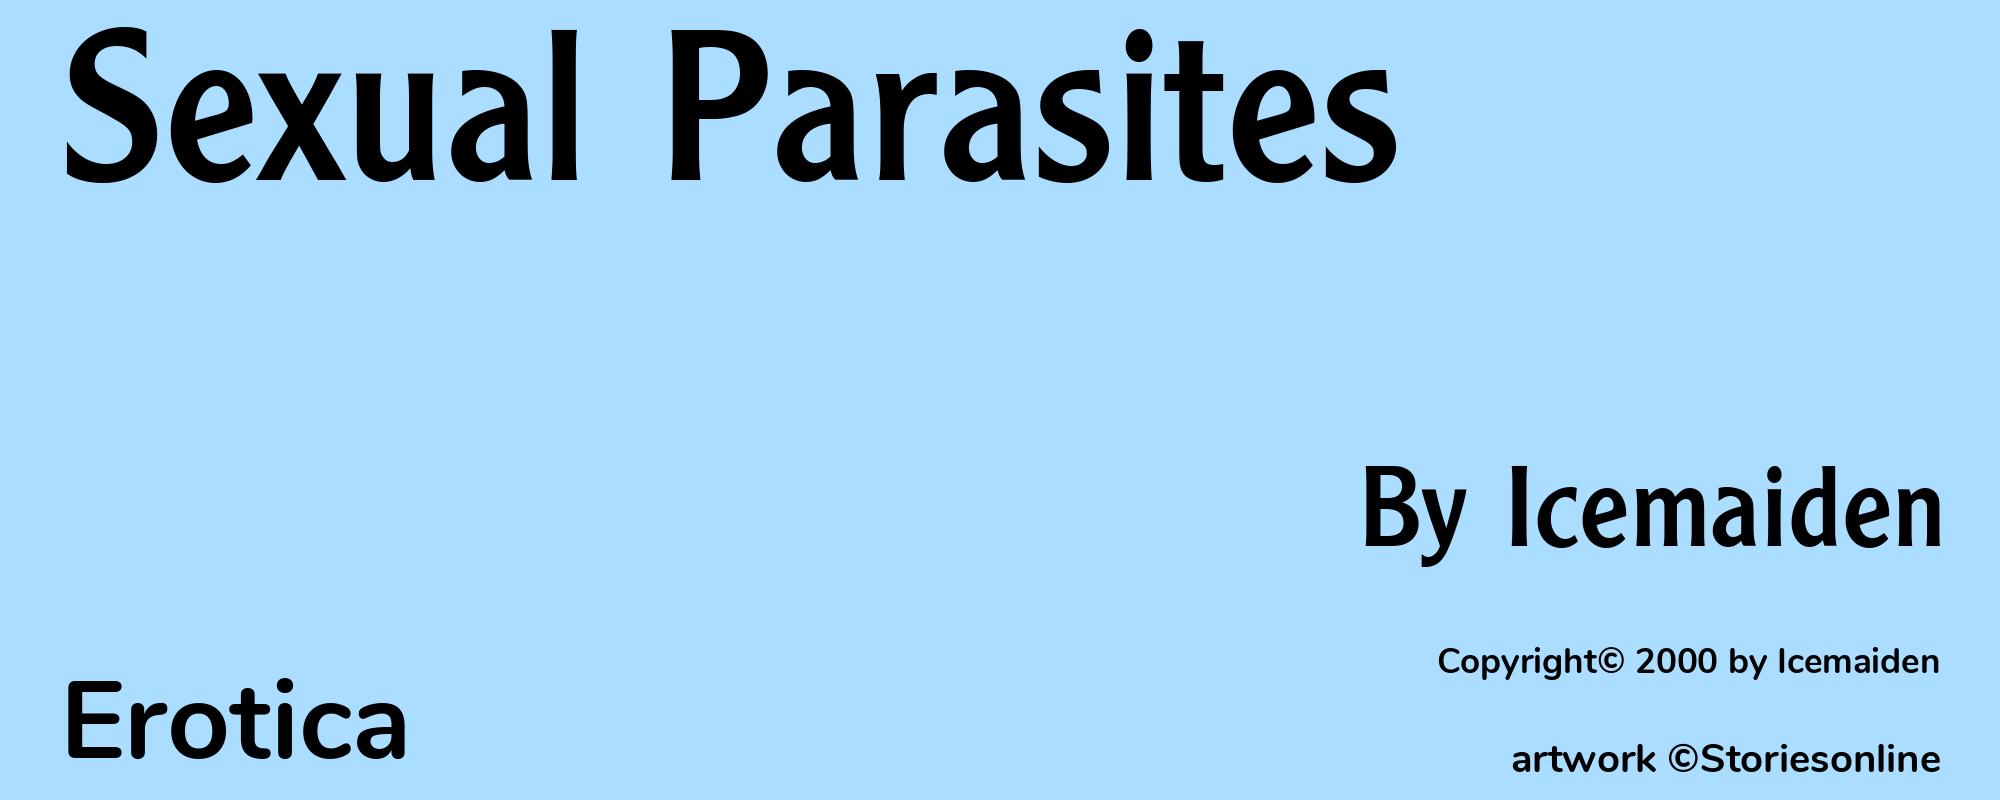 Sexual Parasites - Cover